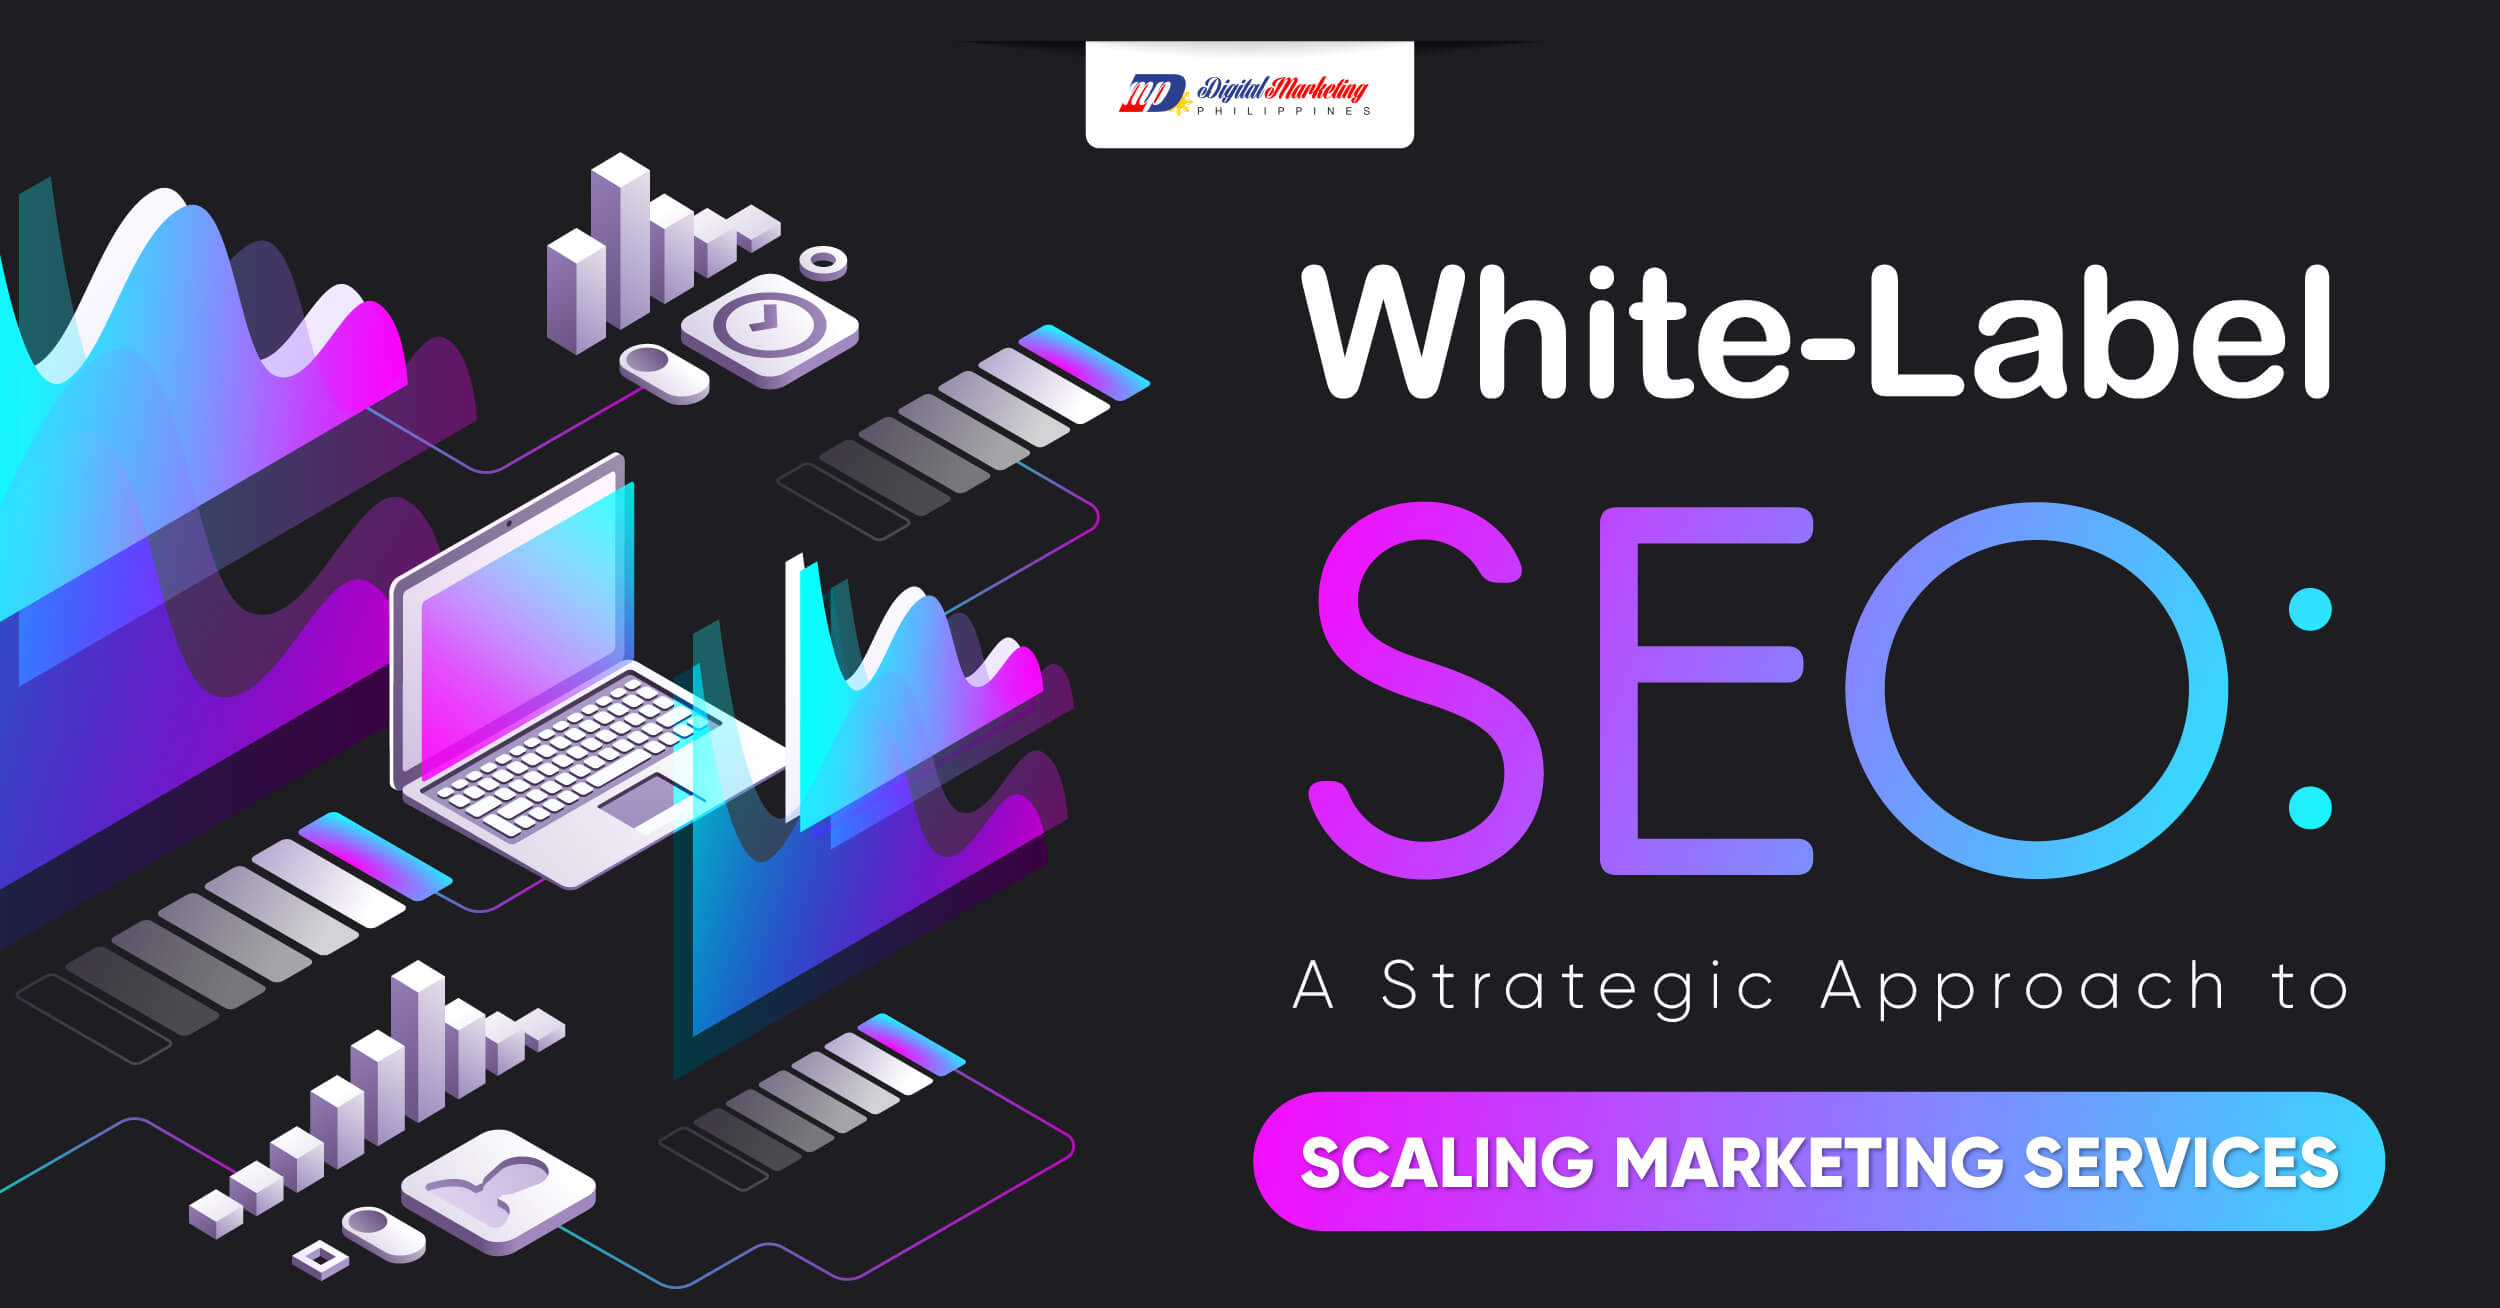 White-Label SEO: A Strategic Approach to Scaling Marketing Services featured image